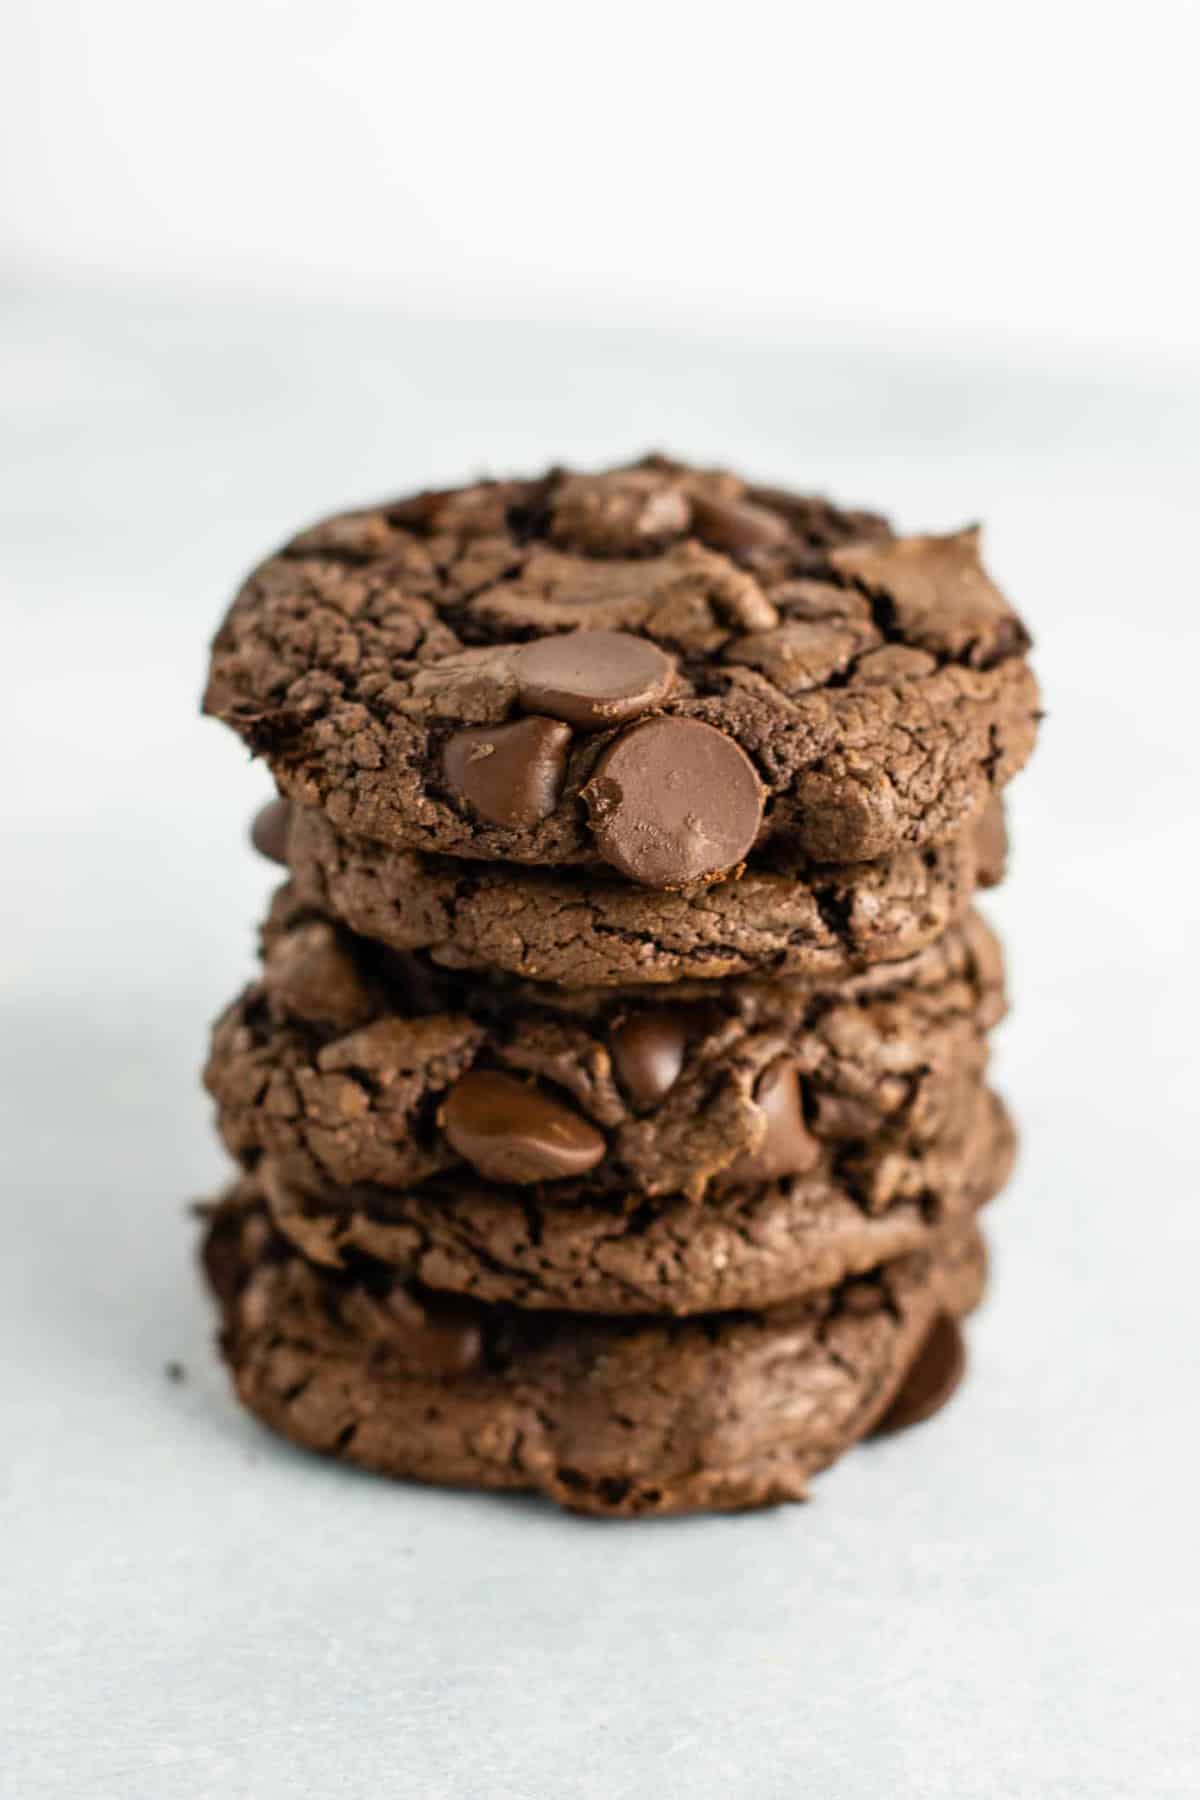 How to make chocolate cake mix cookies – these are AMAZING and literally take 5 minutes to make! #cakemixcookies #cakemix #chocolate #dessert #chocolatecakemix